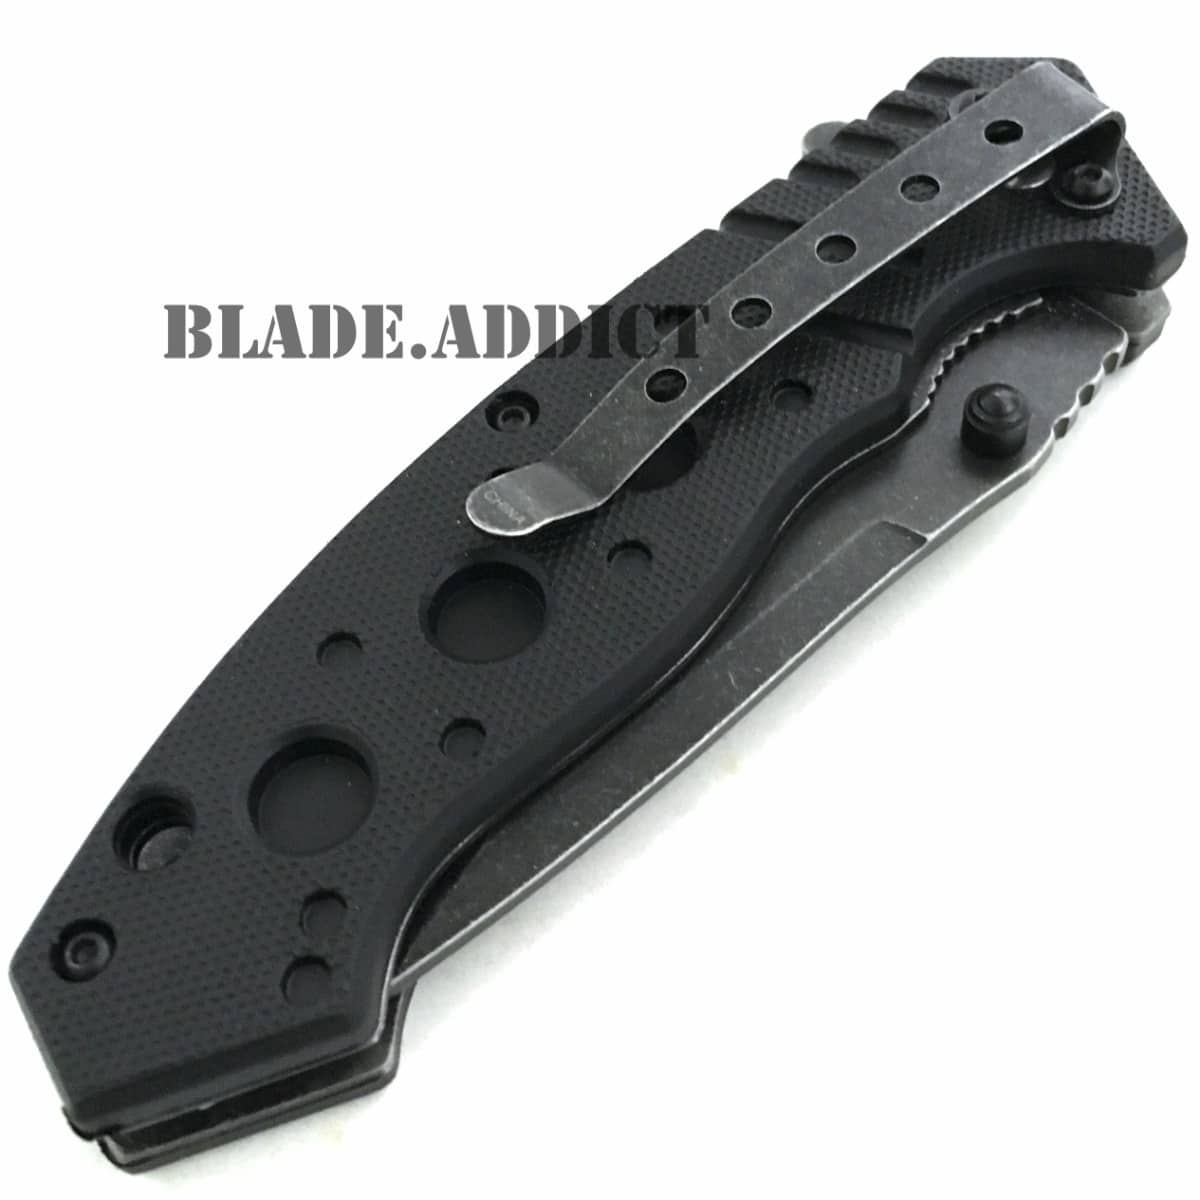 8" BALLISTIC Stonewash Tactical Spring Assisted Open Combat Army Pocket Knife